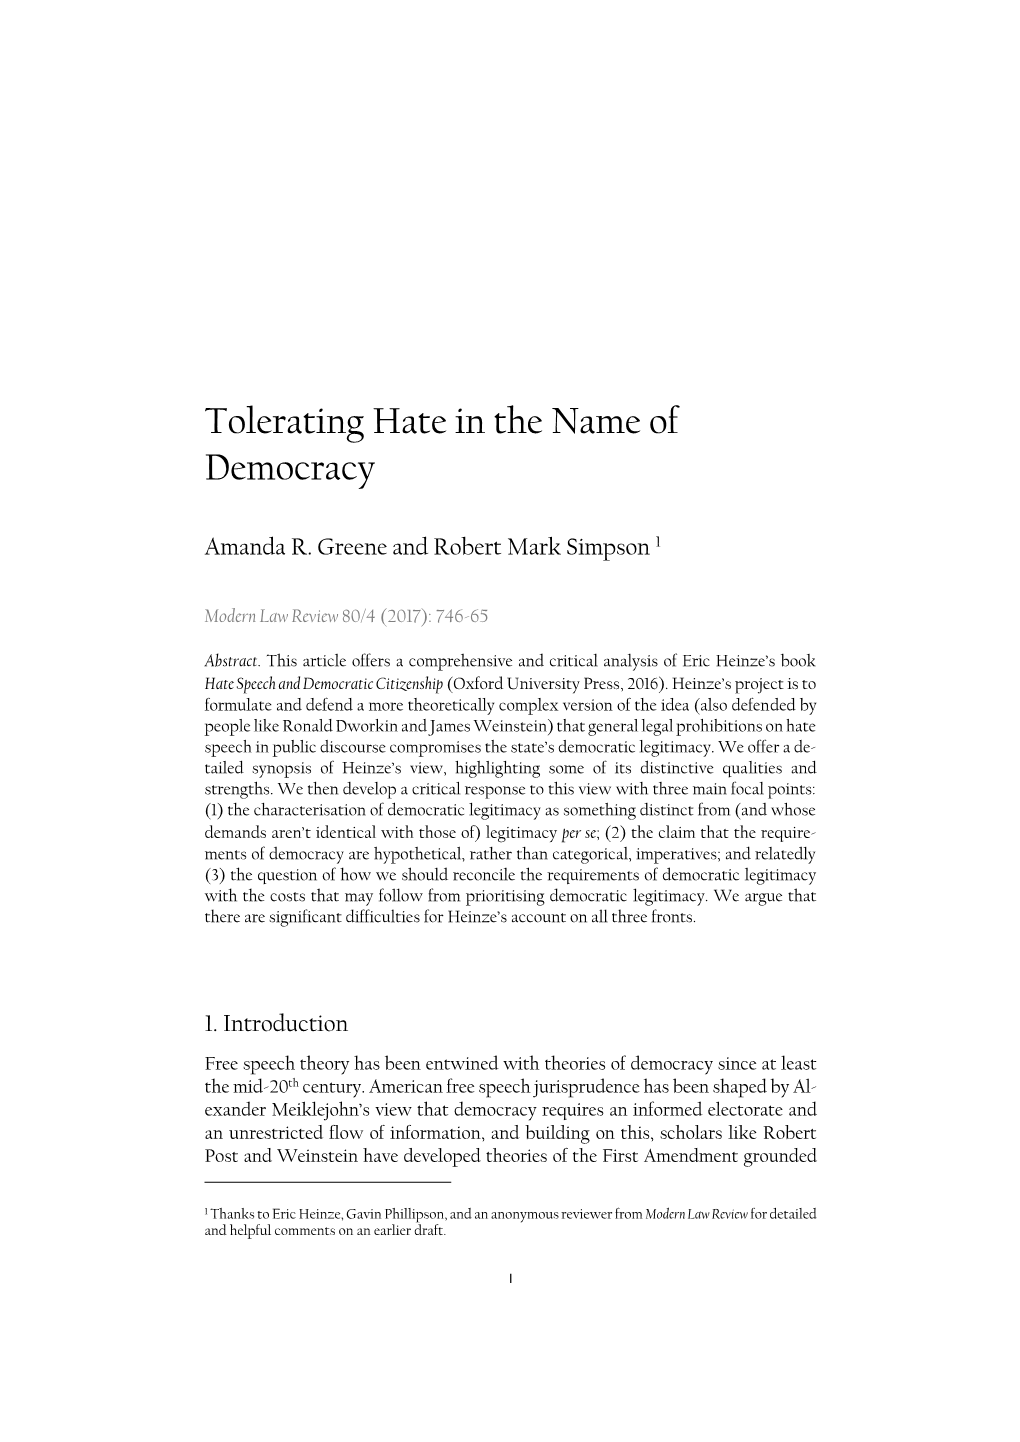 Tolerating Hate in the Name of Democracy